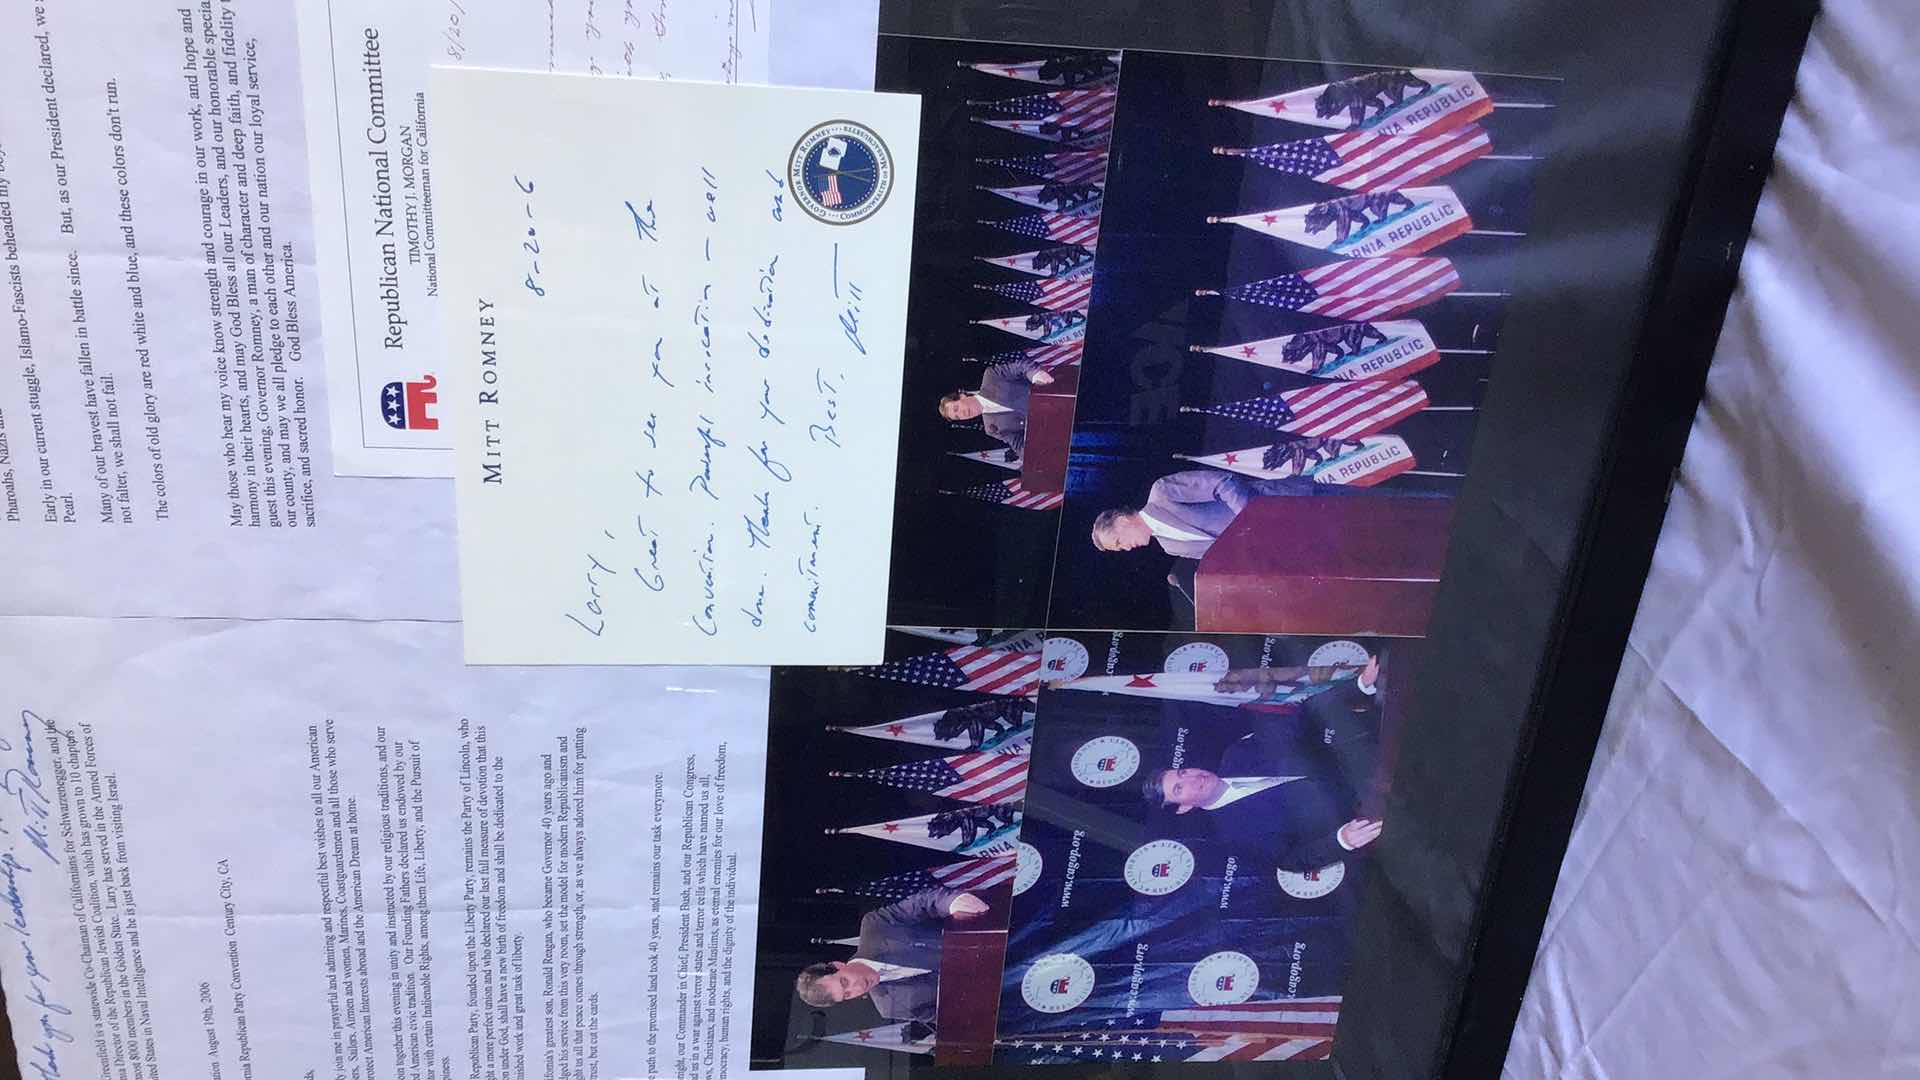 Photo 4 of CALIFORNIA REPUBLICAN PARTY SUMMER 2006 CONVENTION + LETTER FROM MITT ROMNEY 30” X 23”